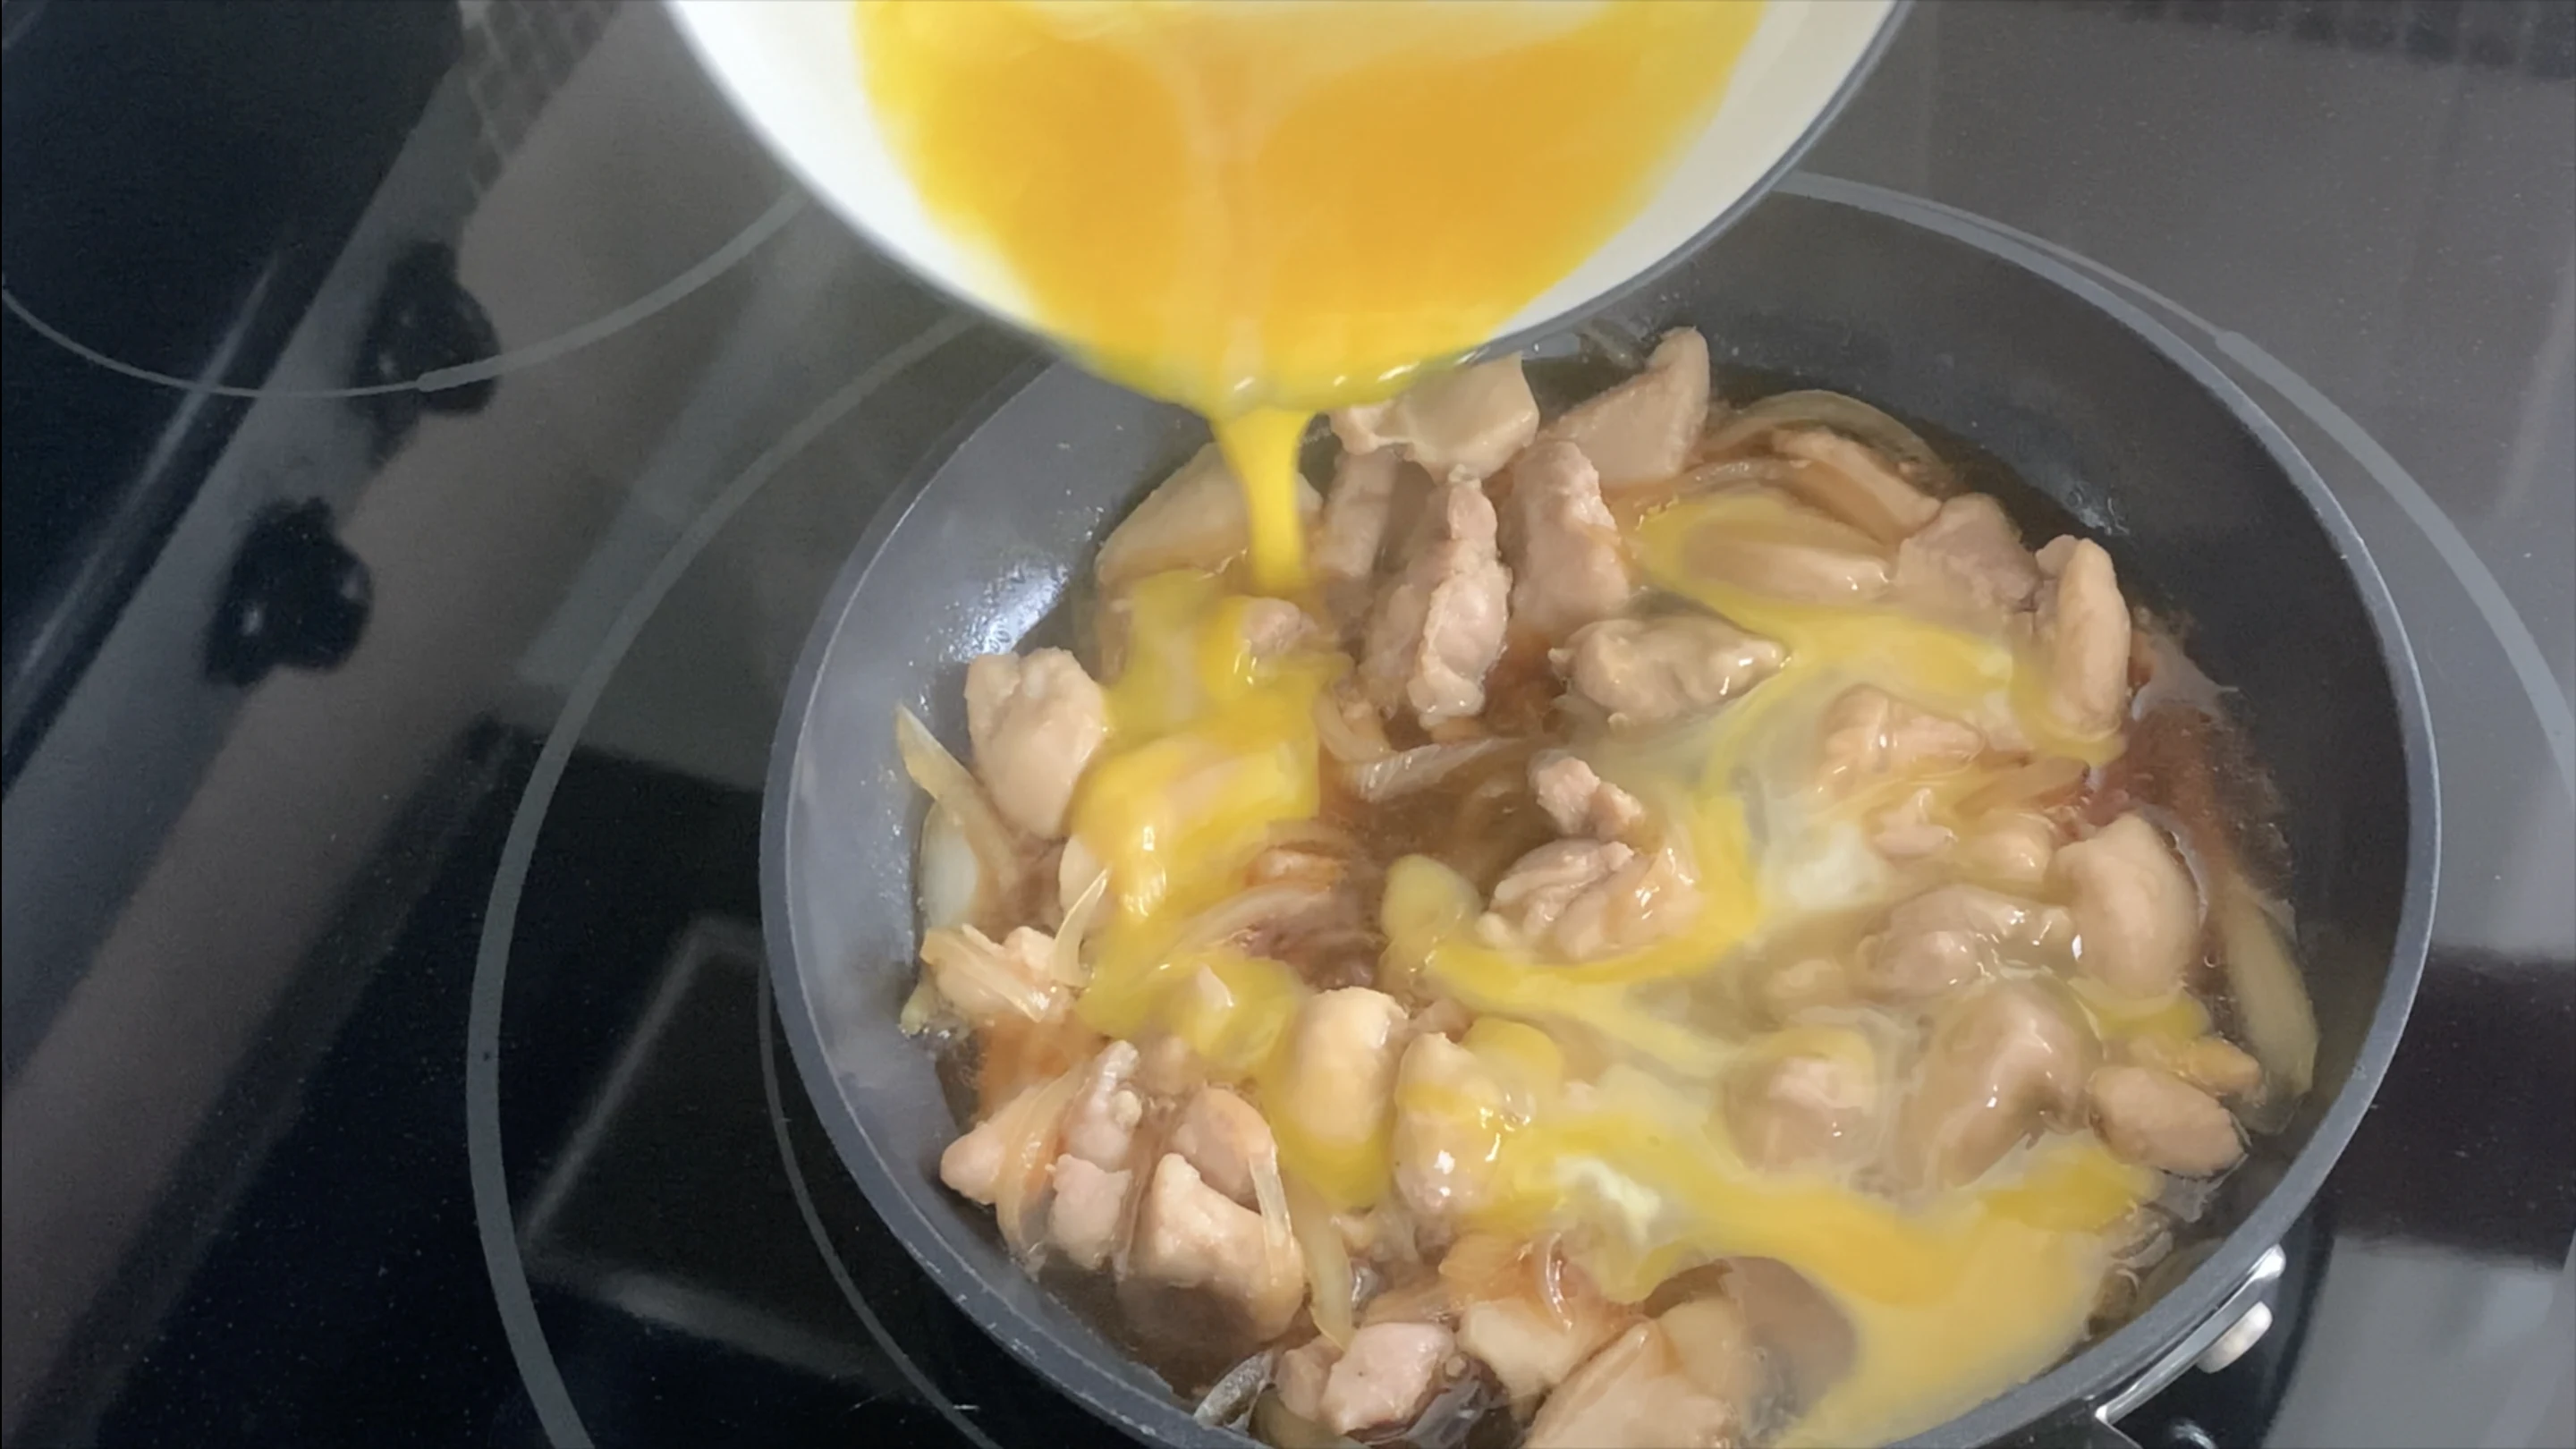 Add the egg to the oyakodon mix, cover and cook for an additional 3 minutes. 